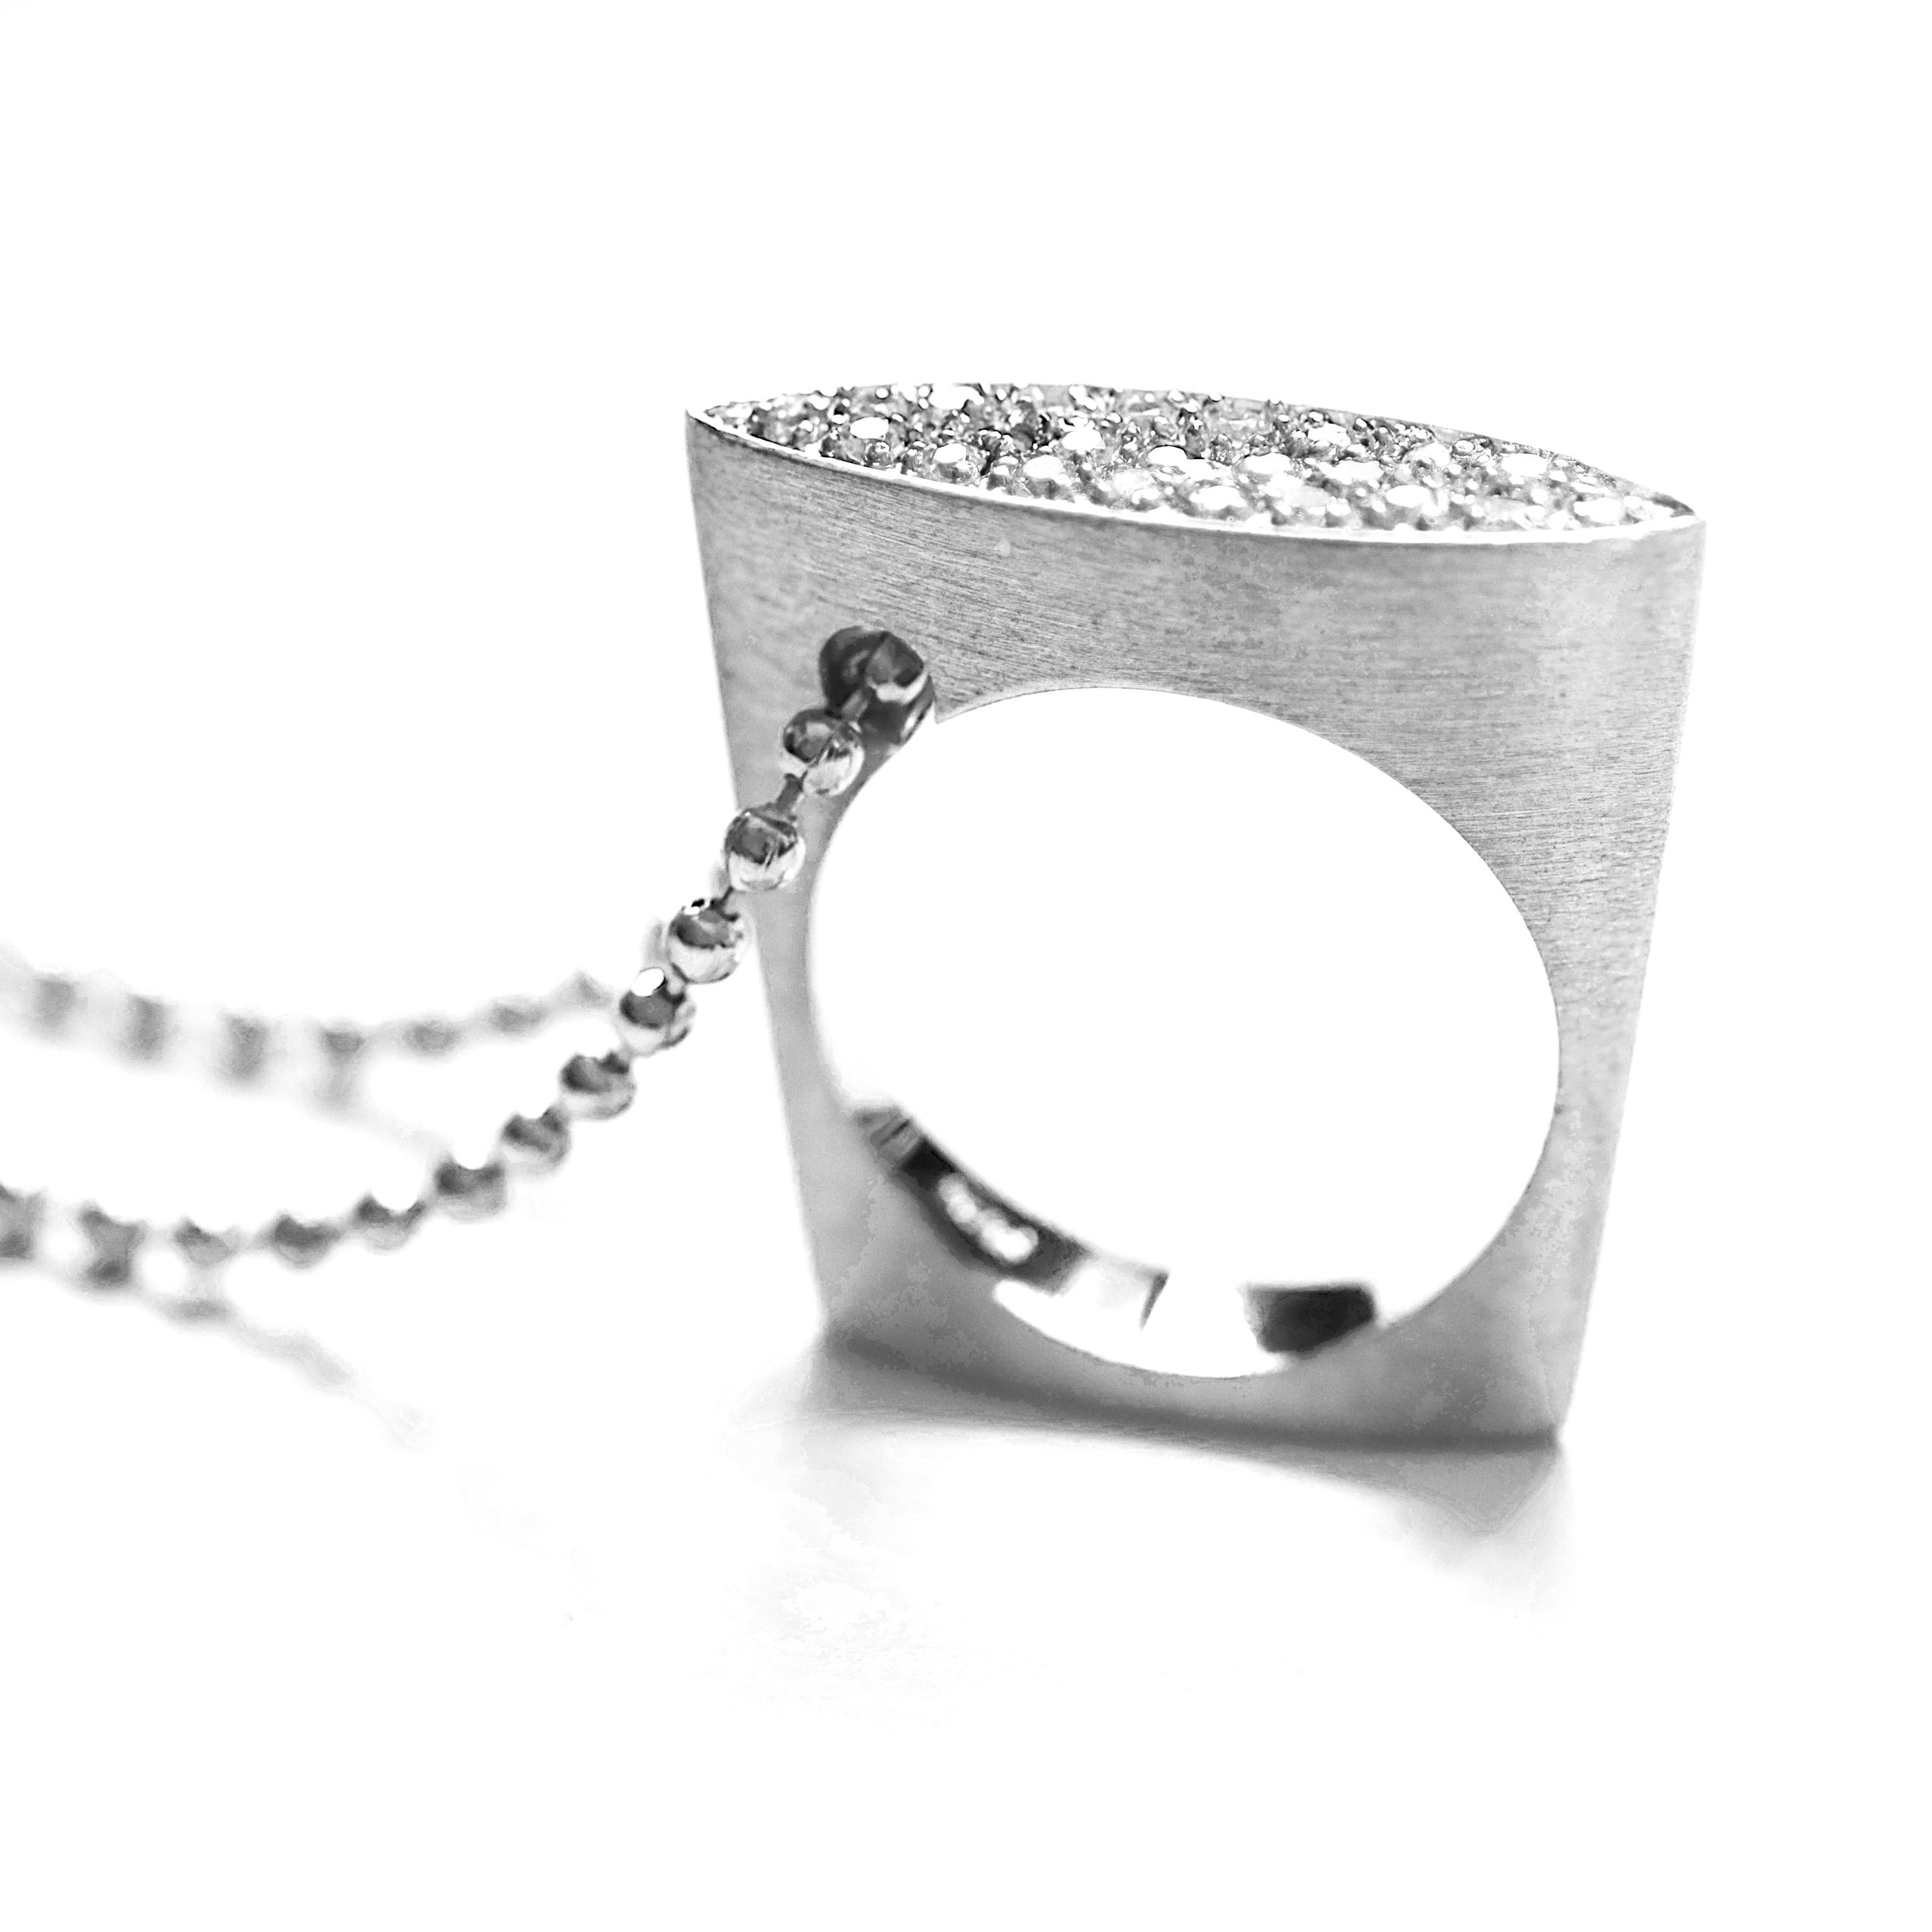 An archive piece from Mirage collection by Jewellery Quarter-based designer. Wear as a ring or with the ball chain necklace, the Mirage pendant/ring is sculptural in form and modern in style. The brushed finish and high polish give a contemporary